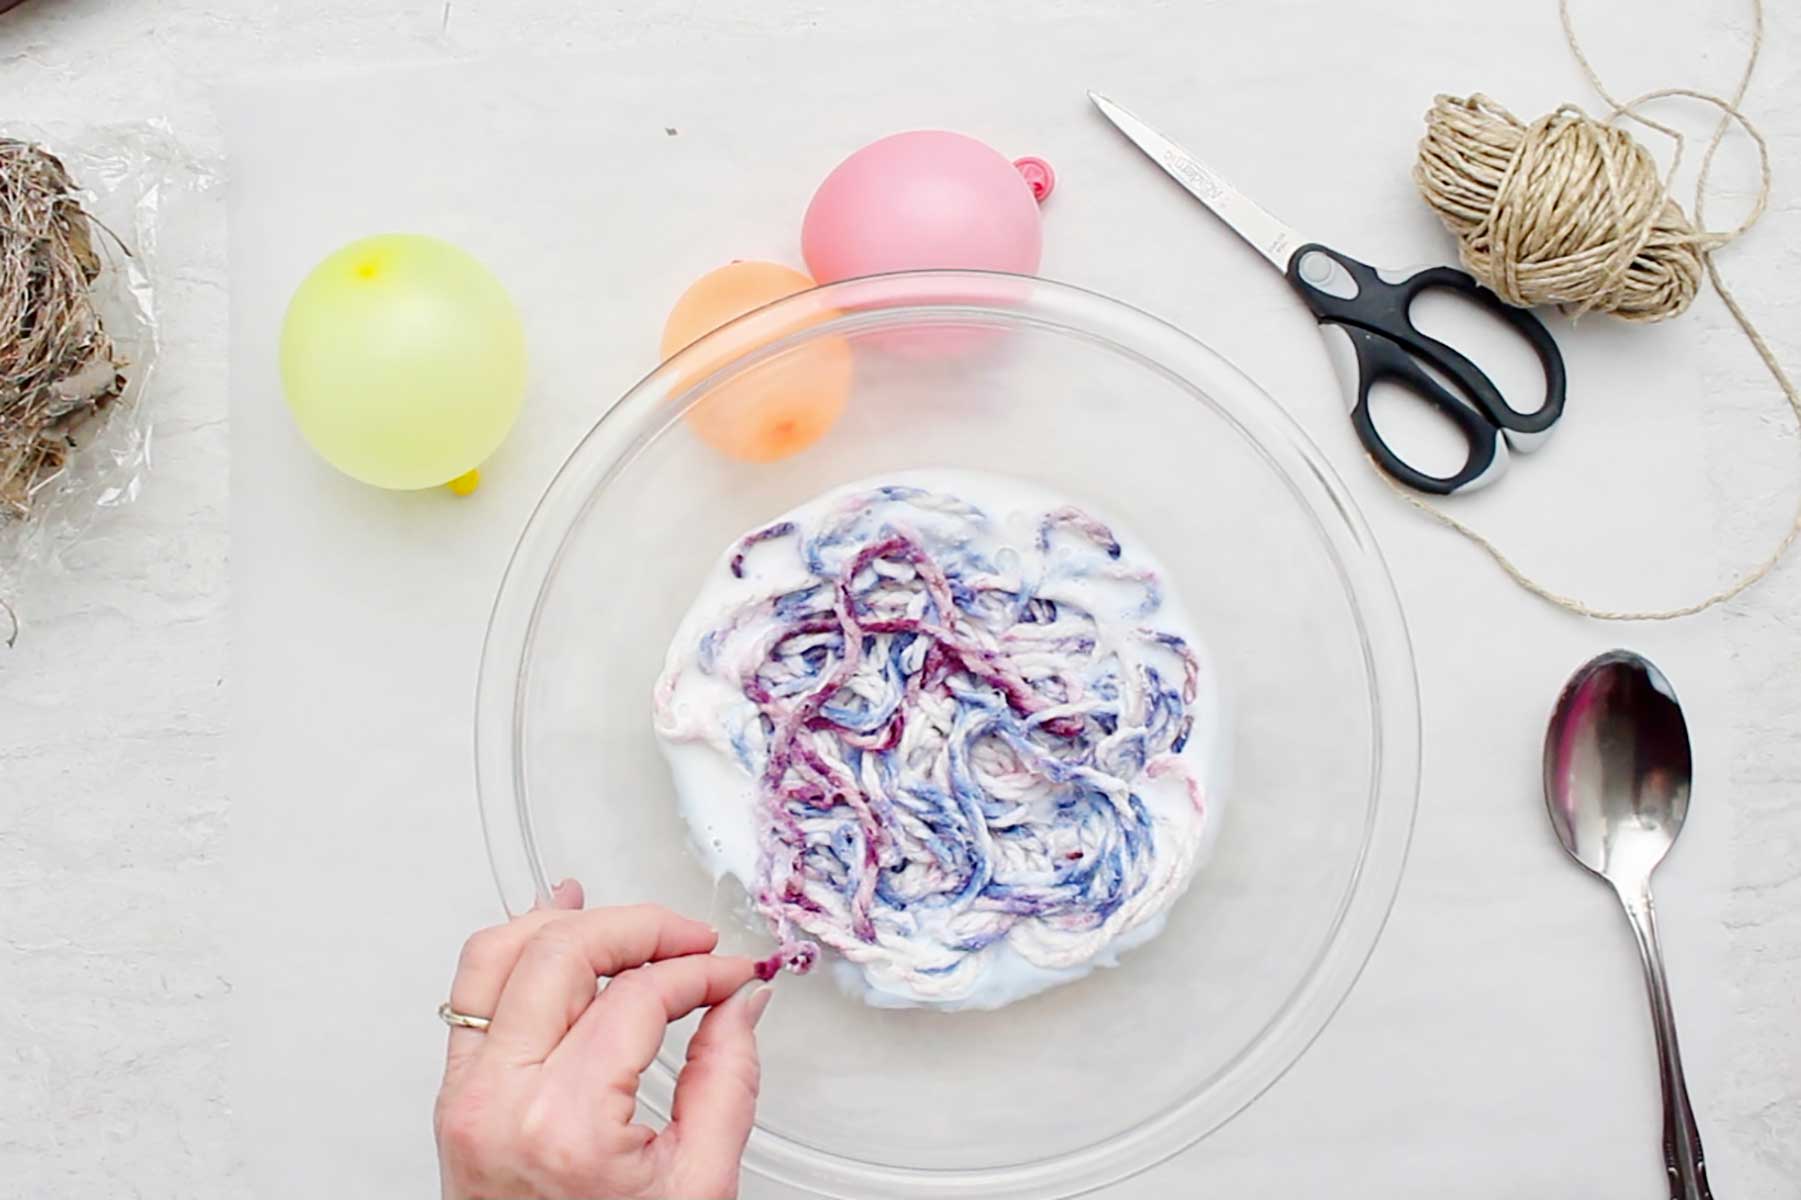 A bowl of colorful variegated yarn soaking in white glue with other supplies near by.